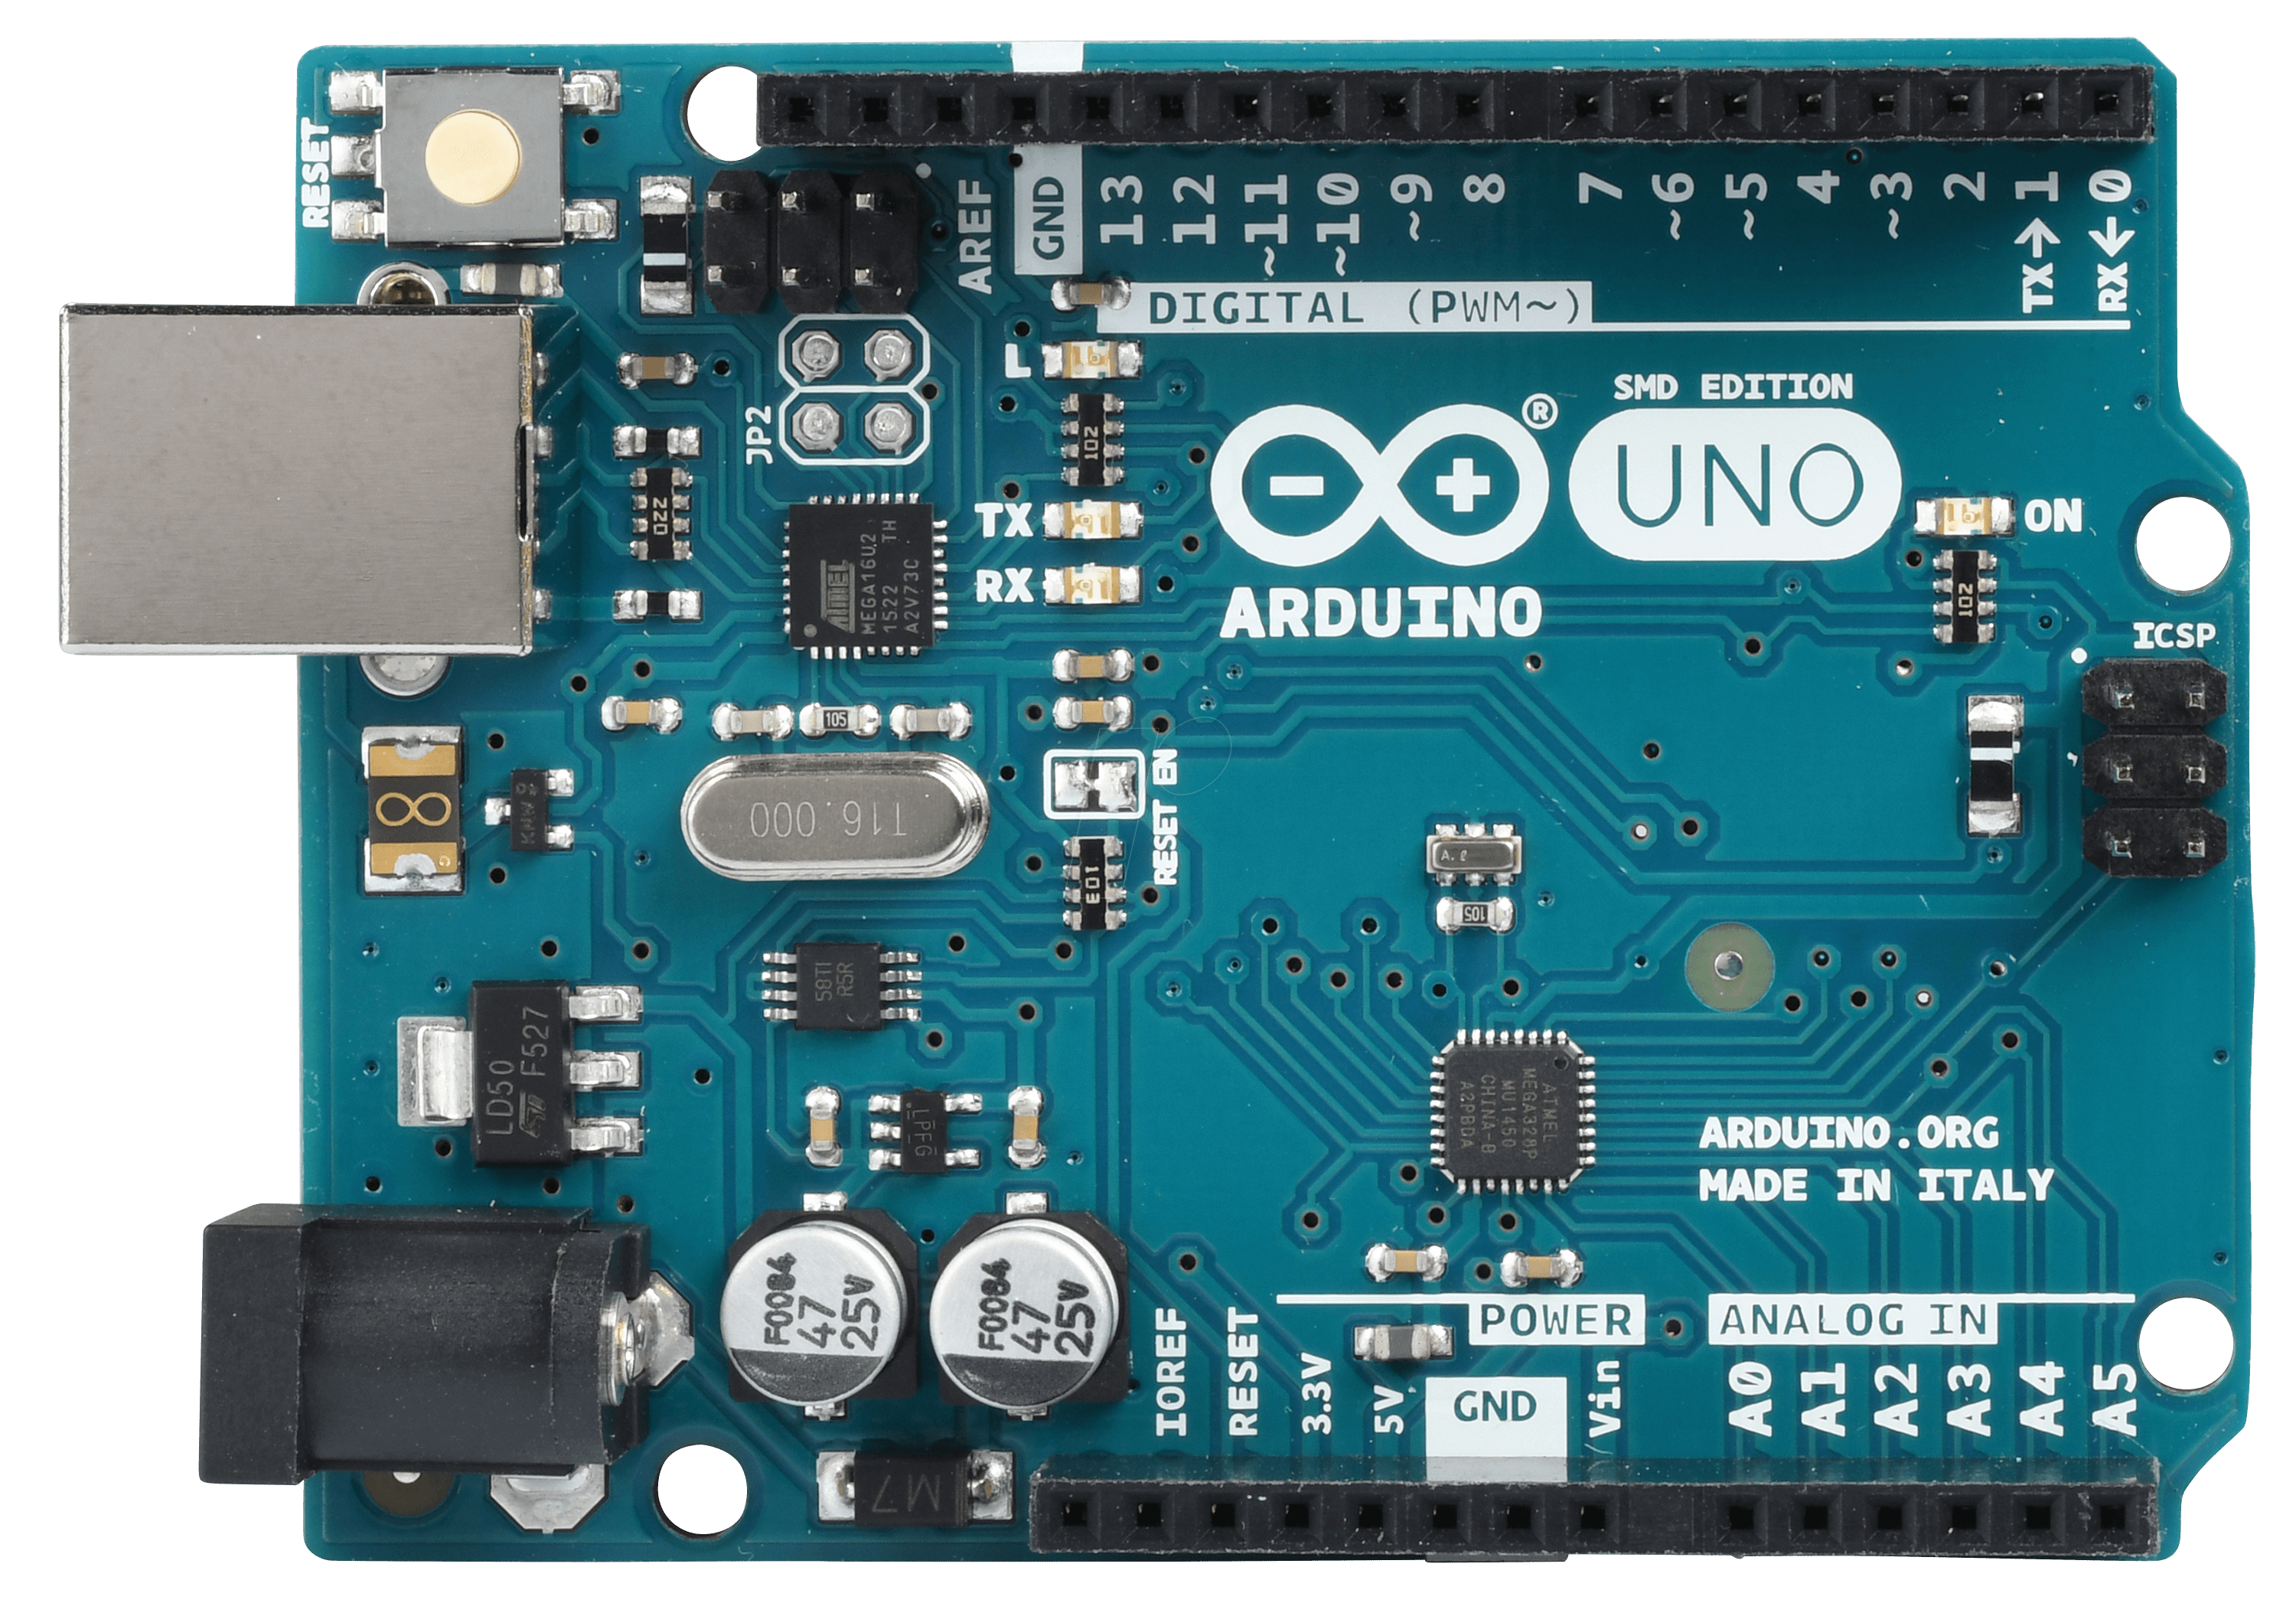 Image result for arduino uno